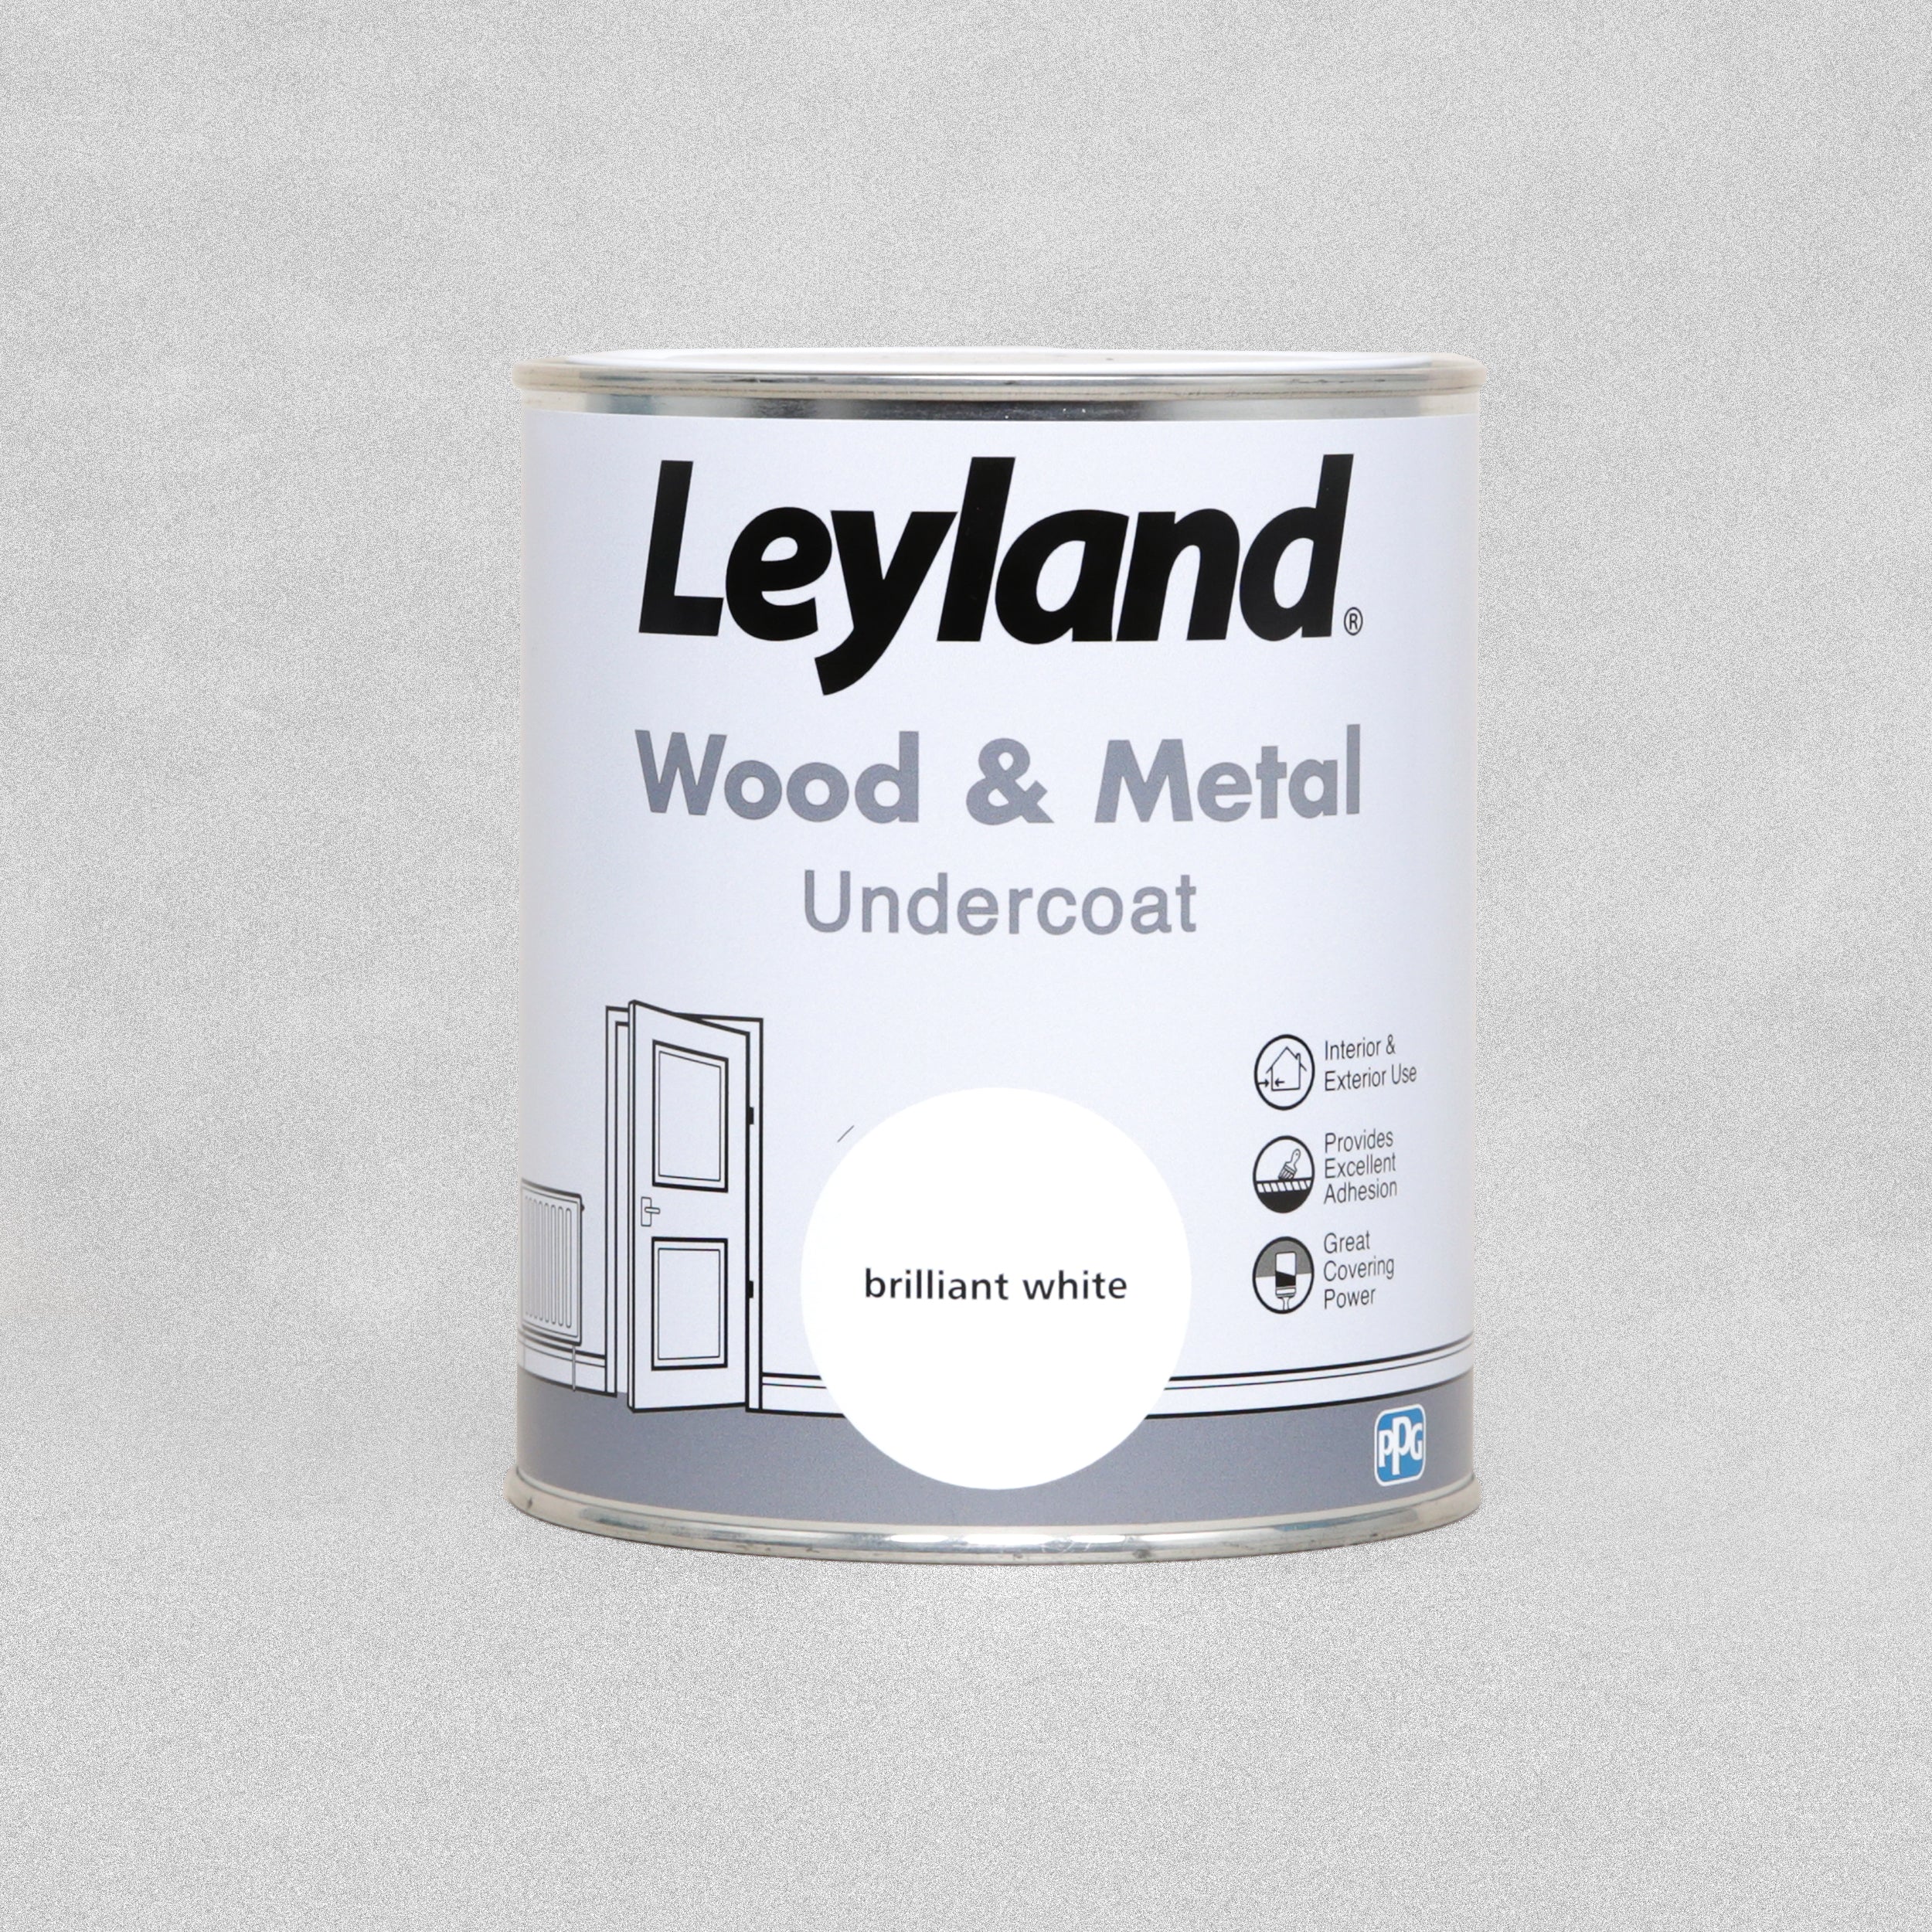 Leyland Wood and Metal Undercoat Paint 750ml - Brilliant White